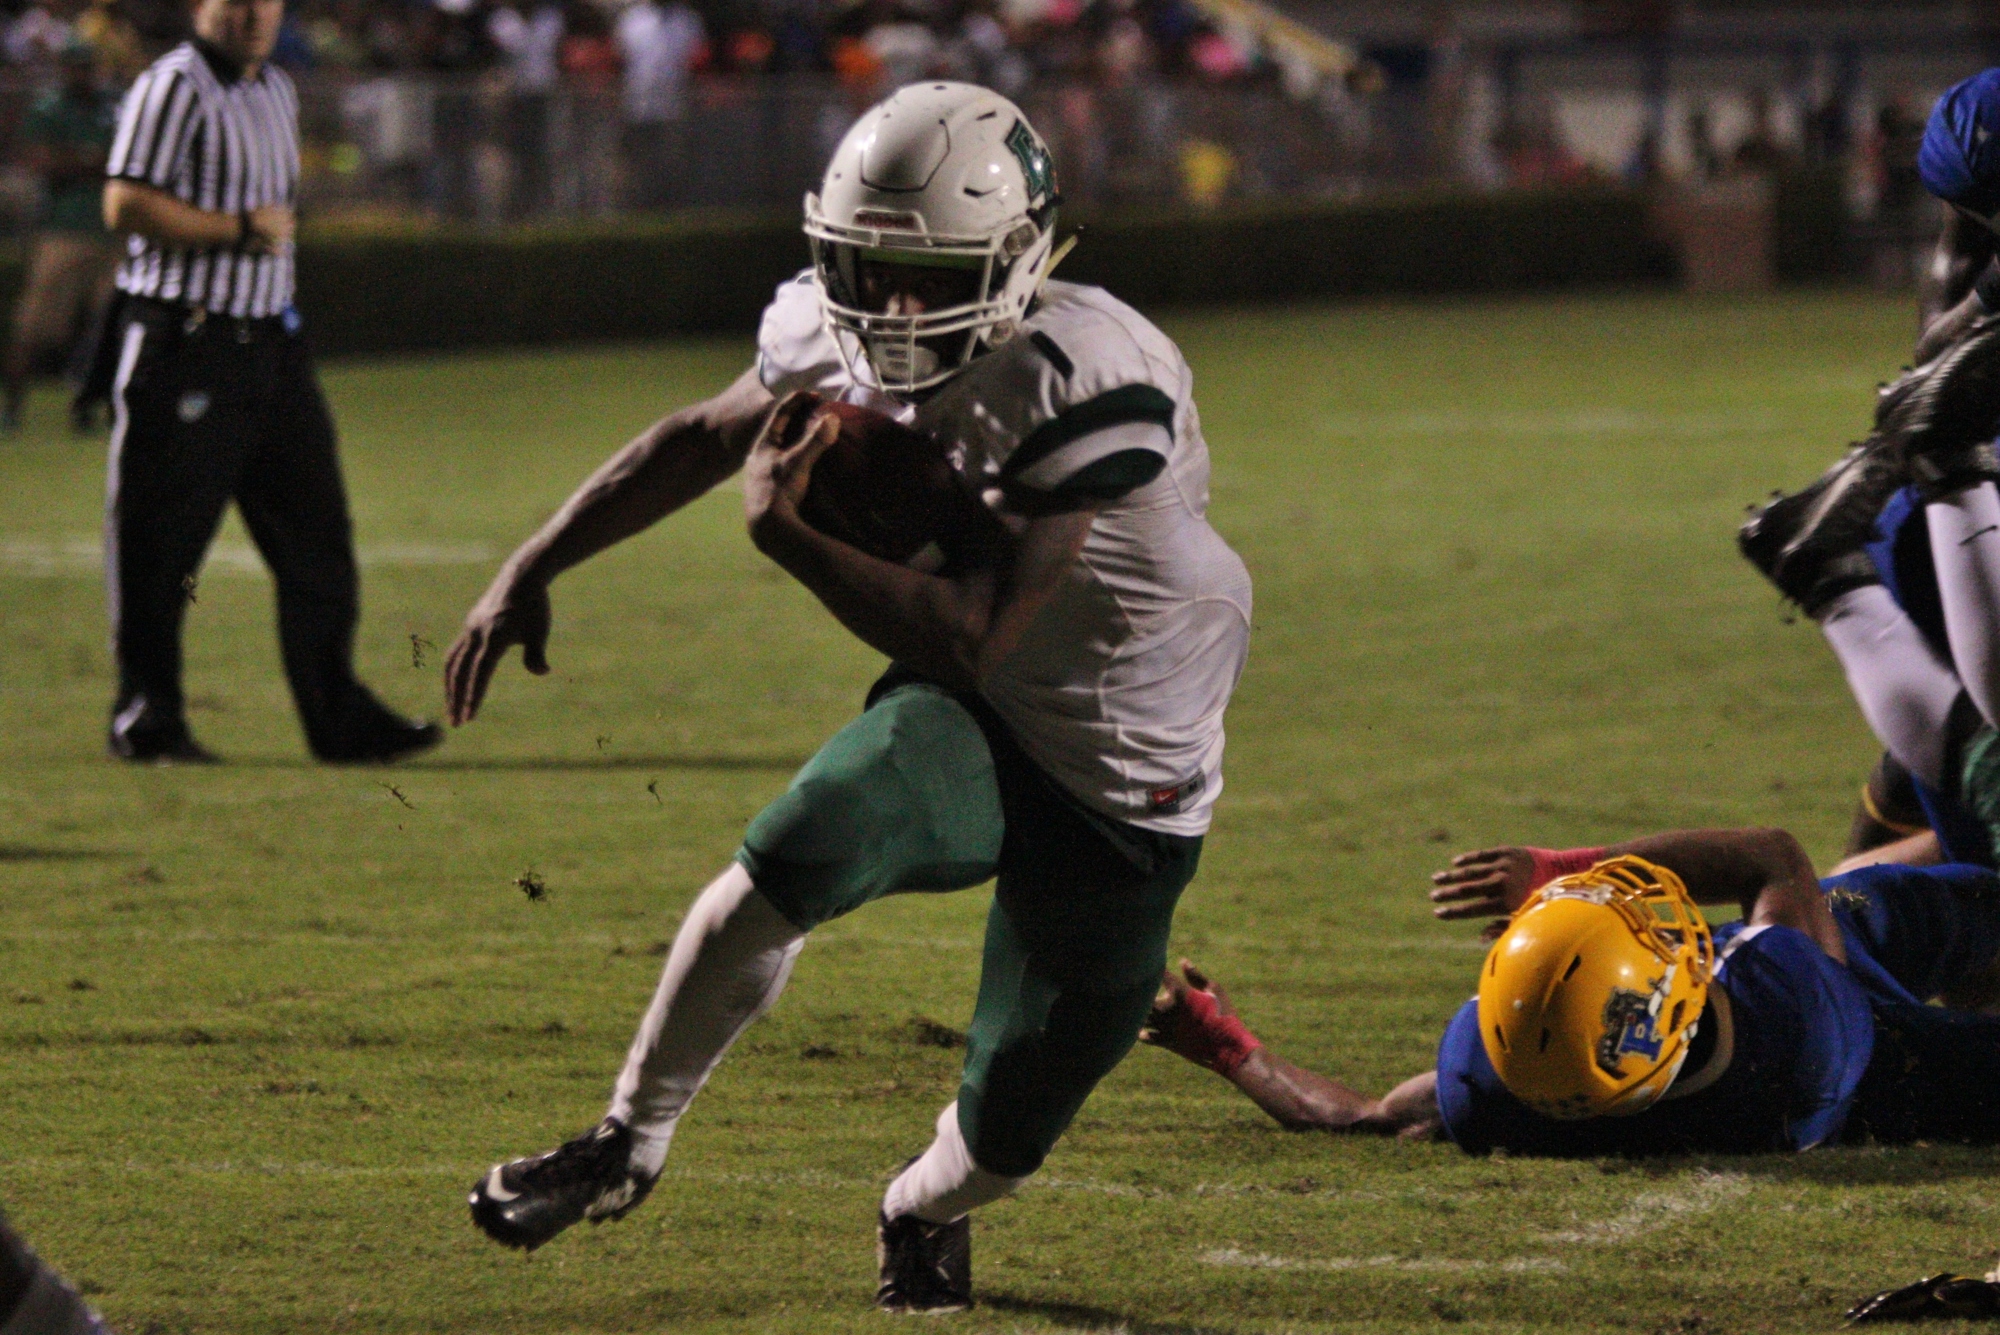 Que'Shaun Byrd refuses to go down during his fourth-down touchdown to give FPC the lead. Photos by Jeff Dawsey